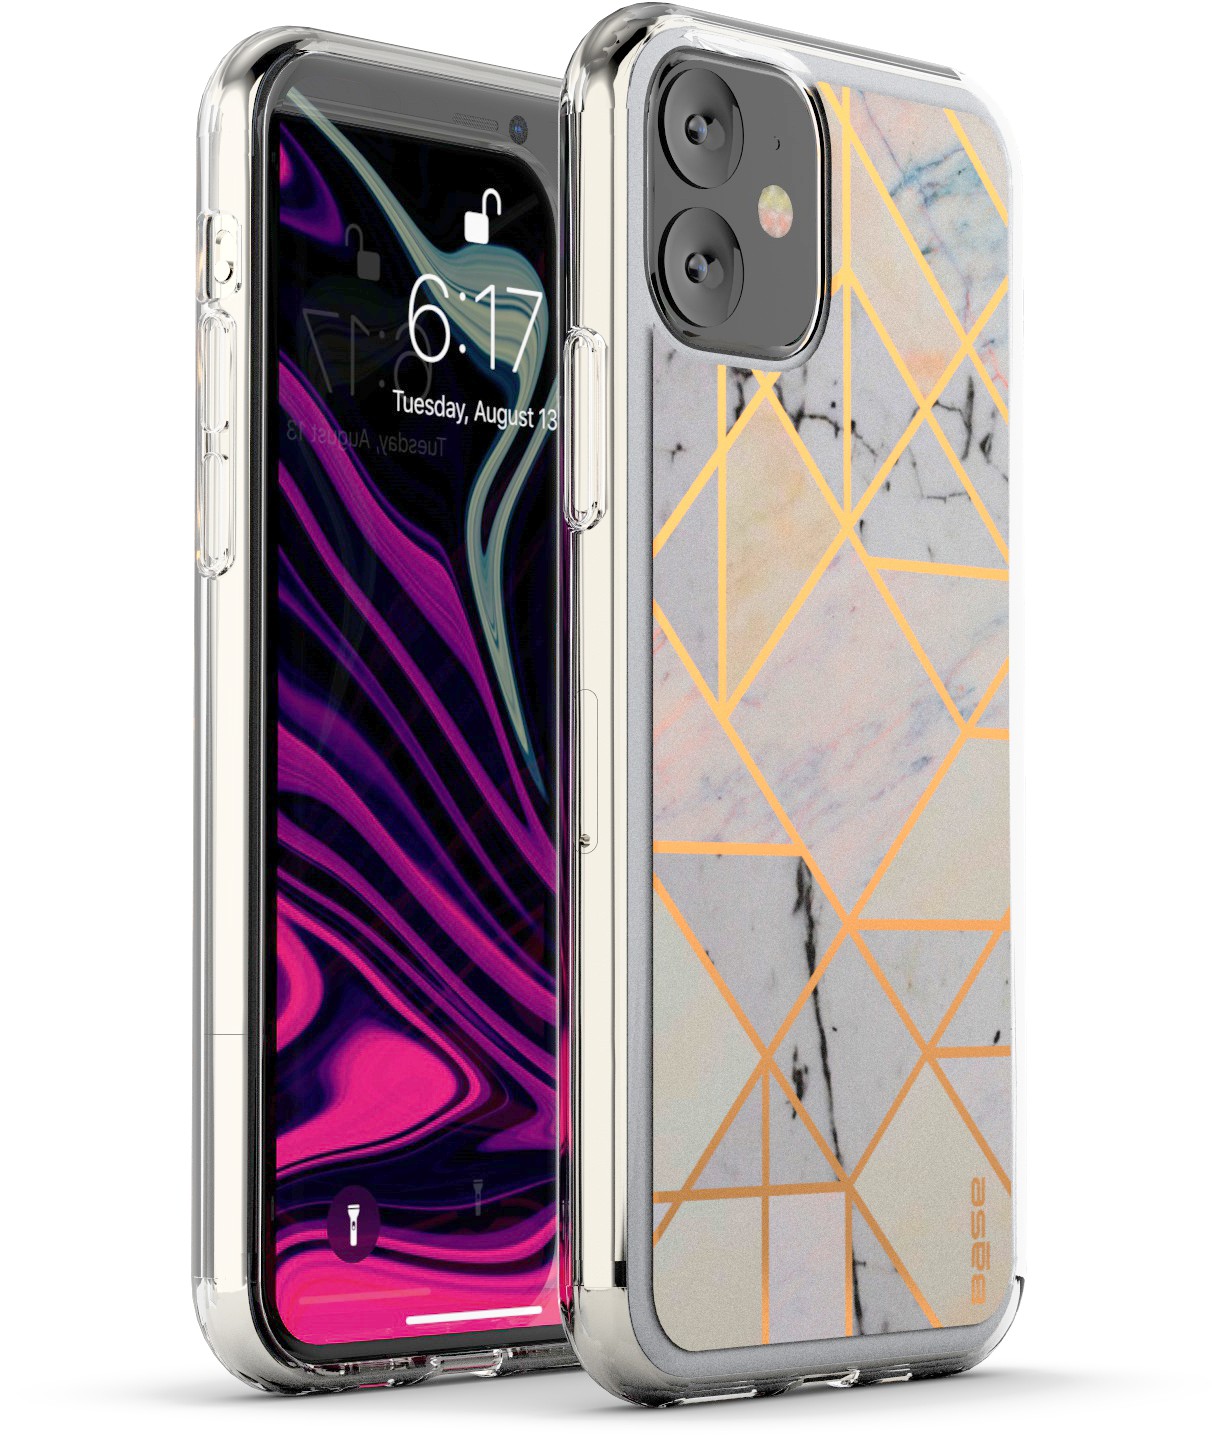 Marbled white protective case with gold geometric design for iPhone 11 cell phones